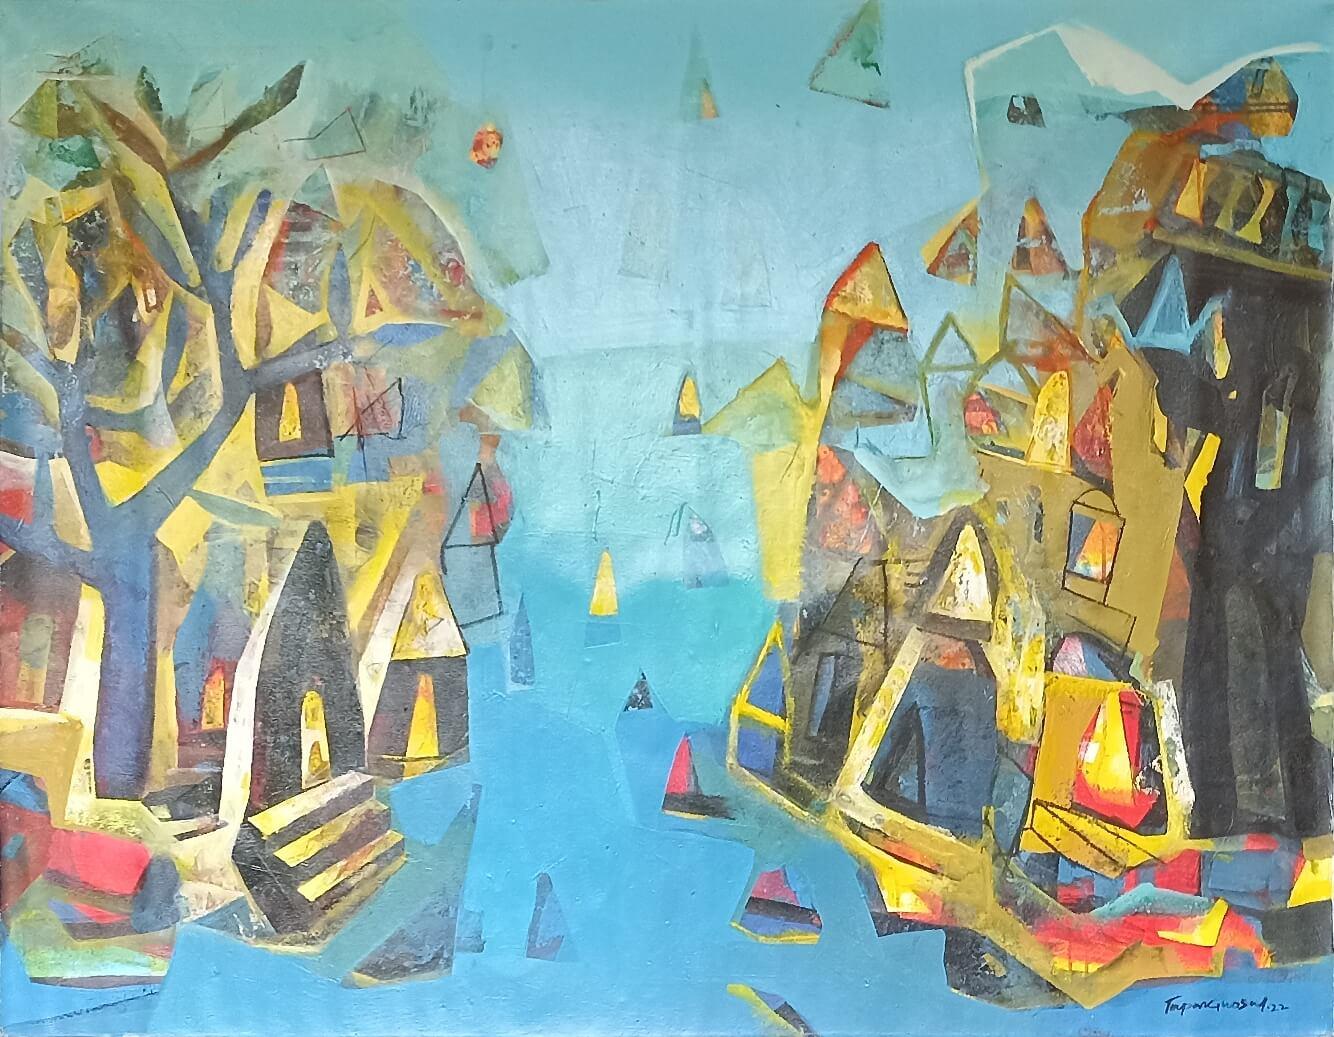 Tapas Ghosal Landscape Painting - Banaras, Acrylic on Canvas, Blue, Yellow, Red by Contemporary Artist "In Stock"